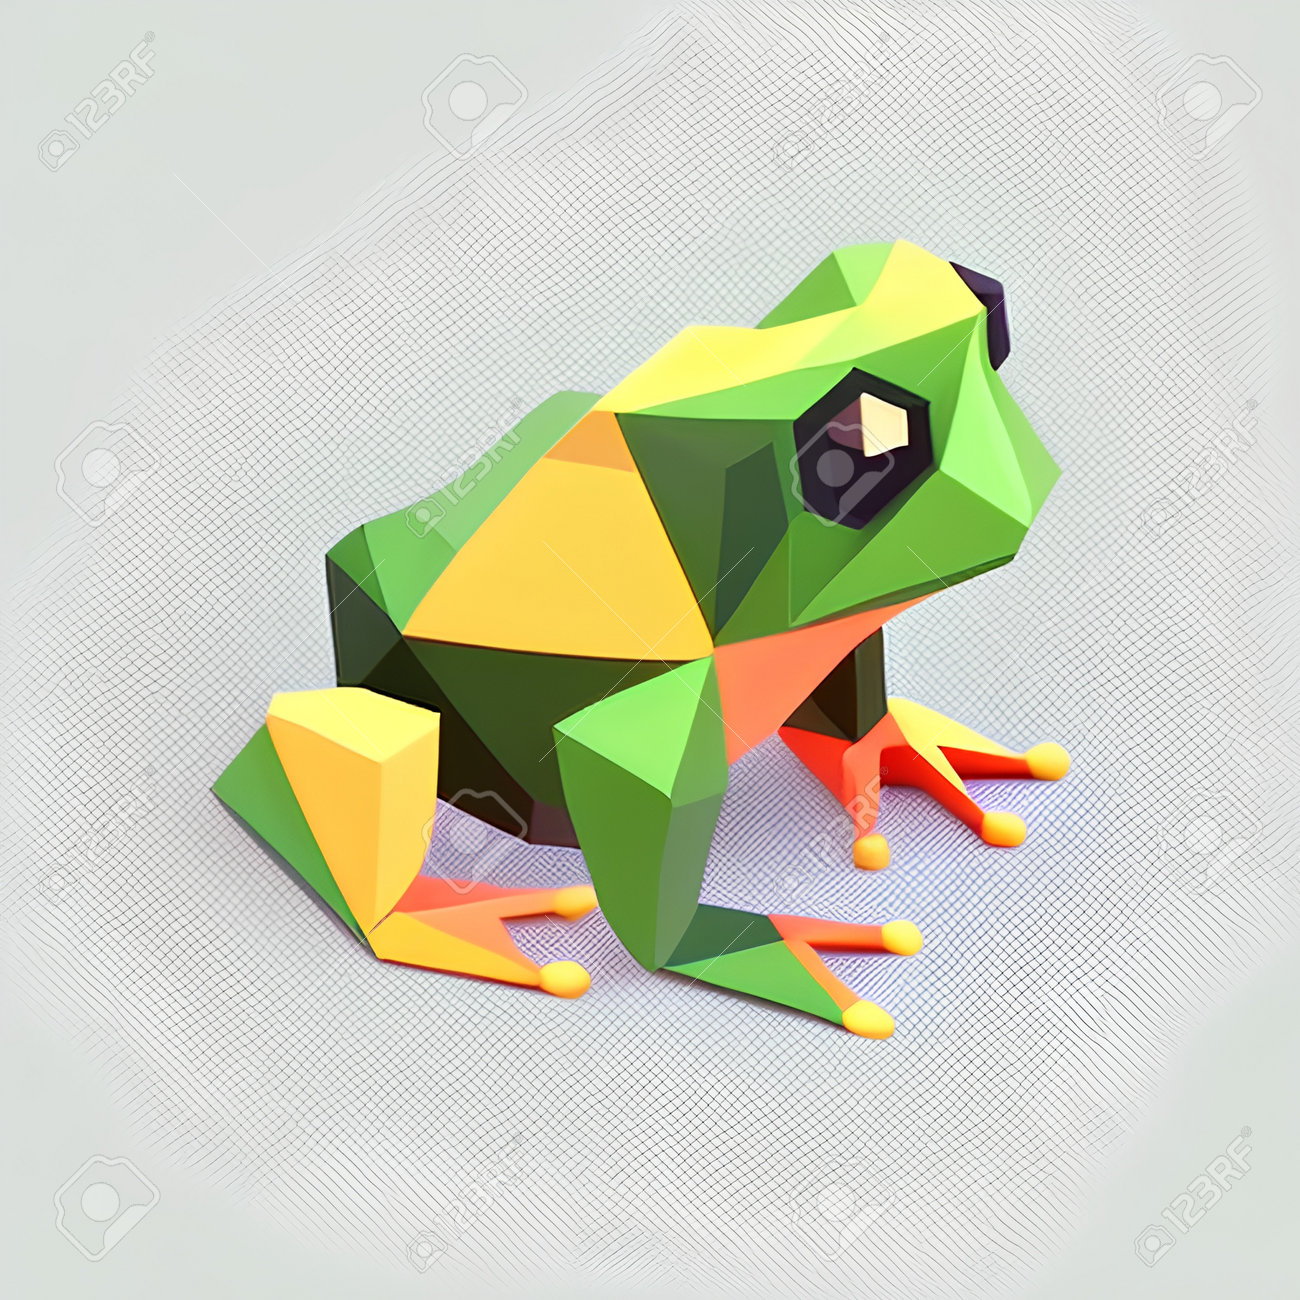 Illustration of a frog in a low poly style on a gray background free image and photograph